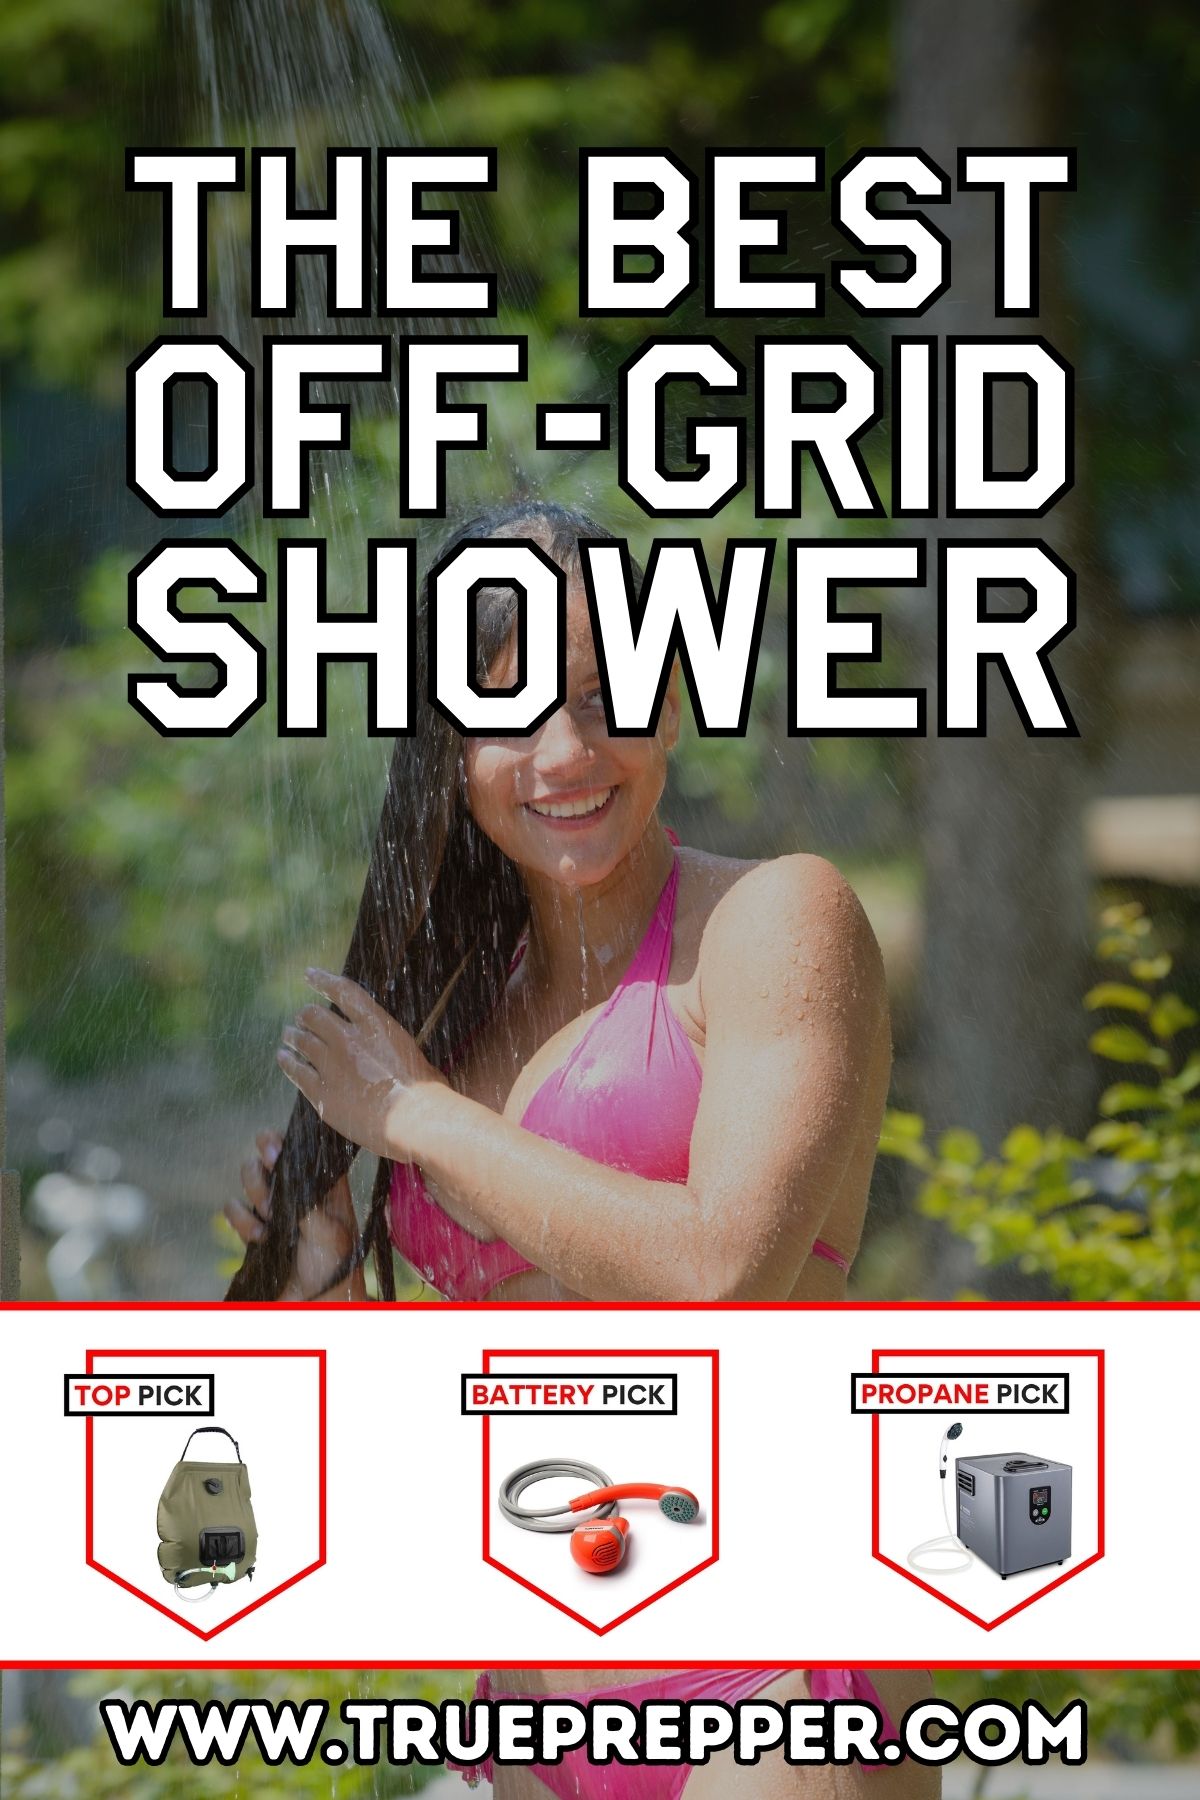 The Best Off-Grid Shower